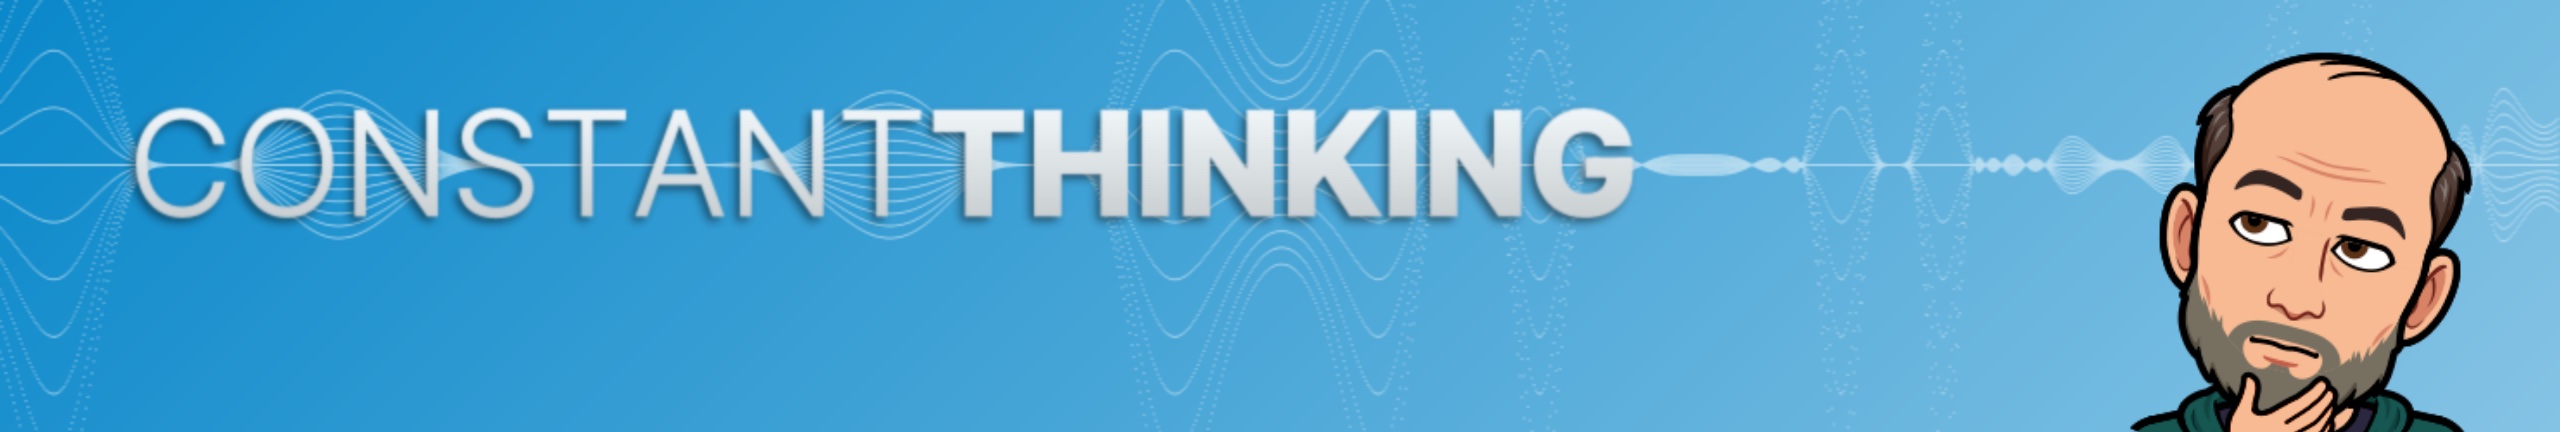 Constant Thinking | Technology Thoughts for the Quality Geek